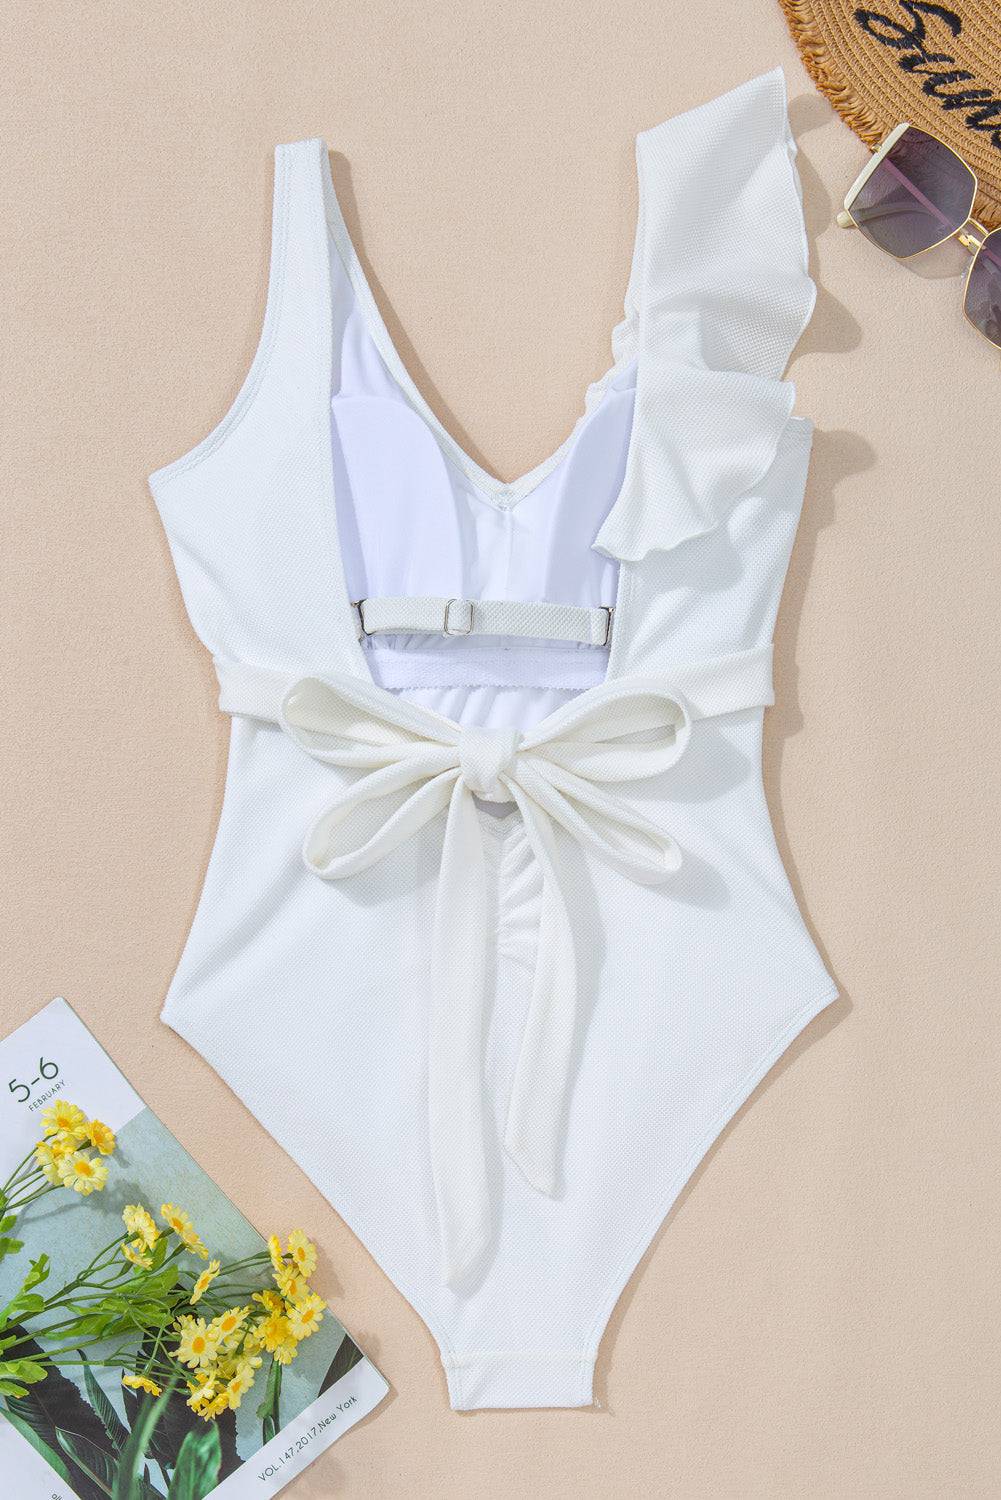 a white one piece swimsuit with a bow on the back